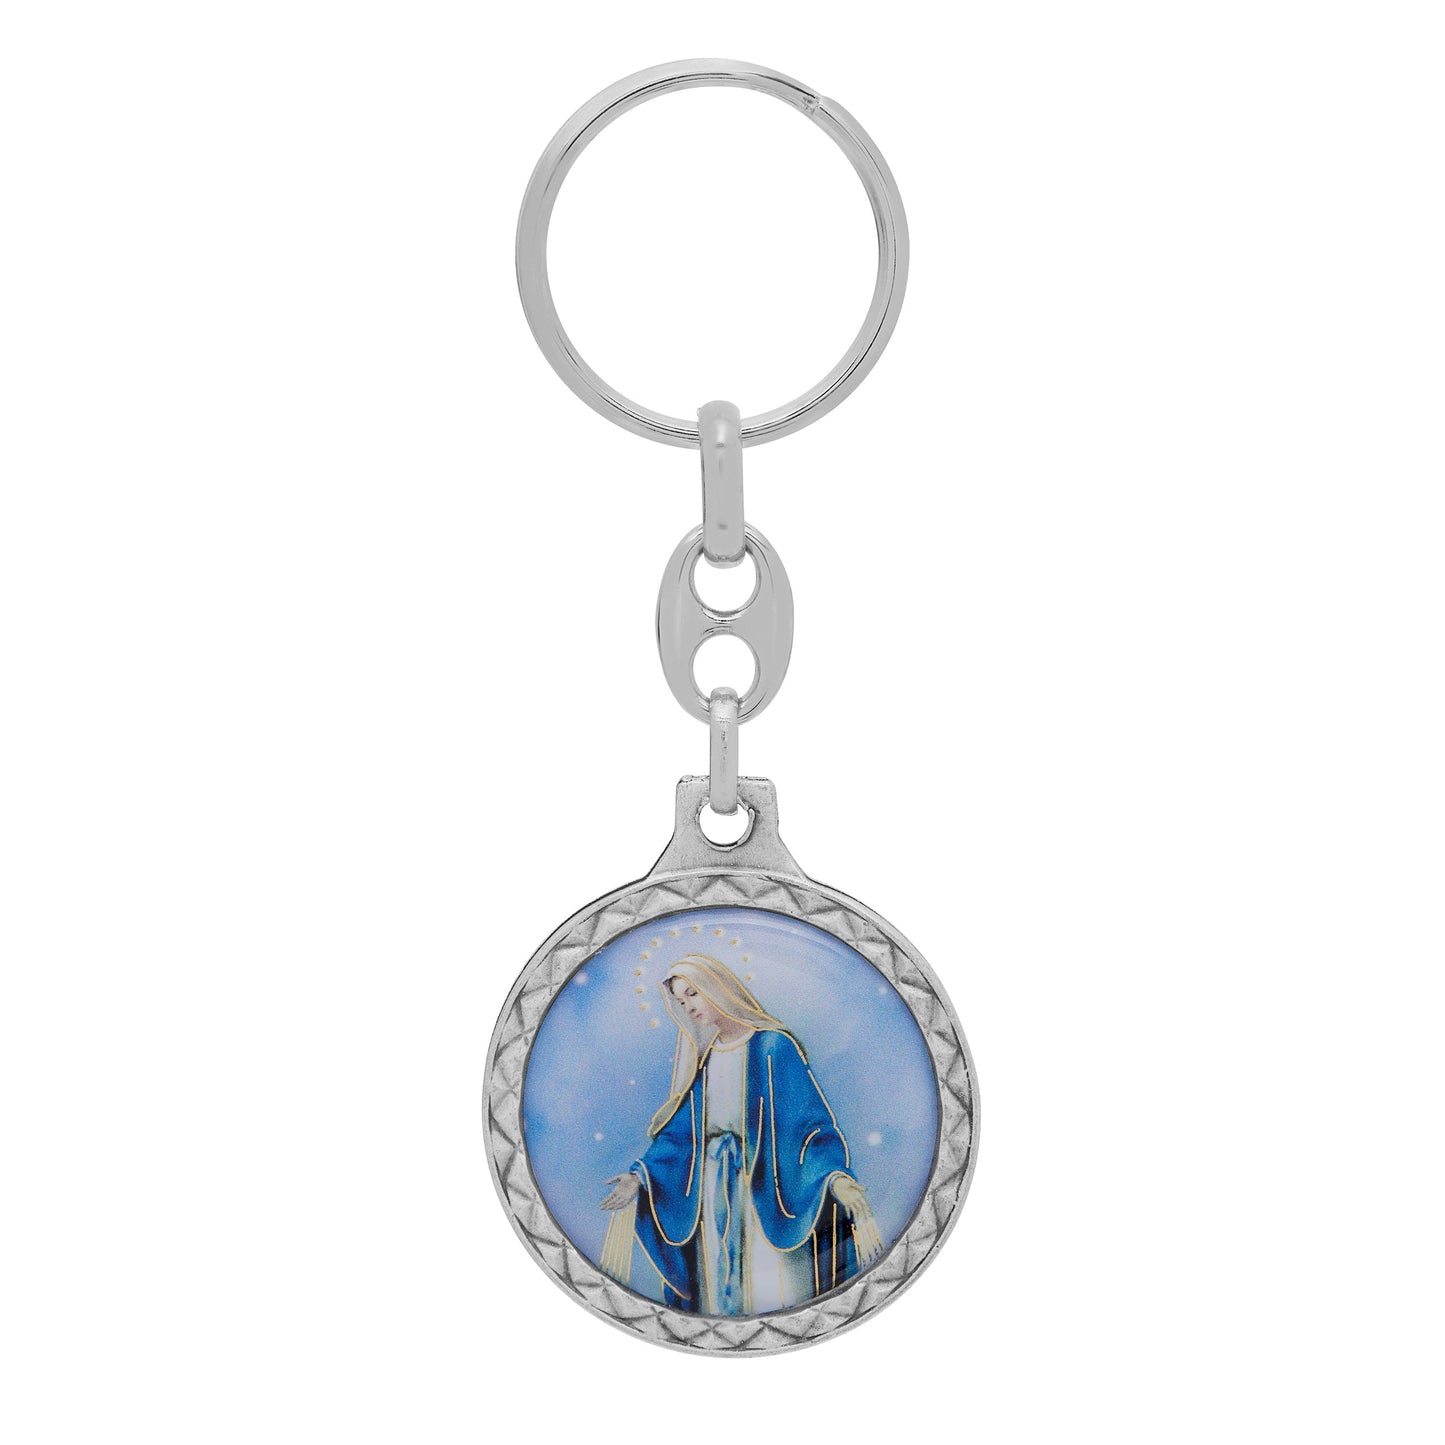 Mondo Cattolico Keychains Round Colored Metal Keychain of Our Lady of the Miraculous Medal